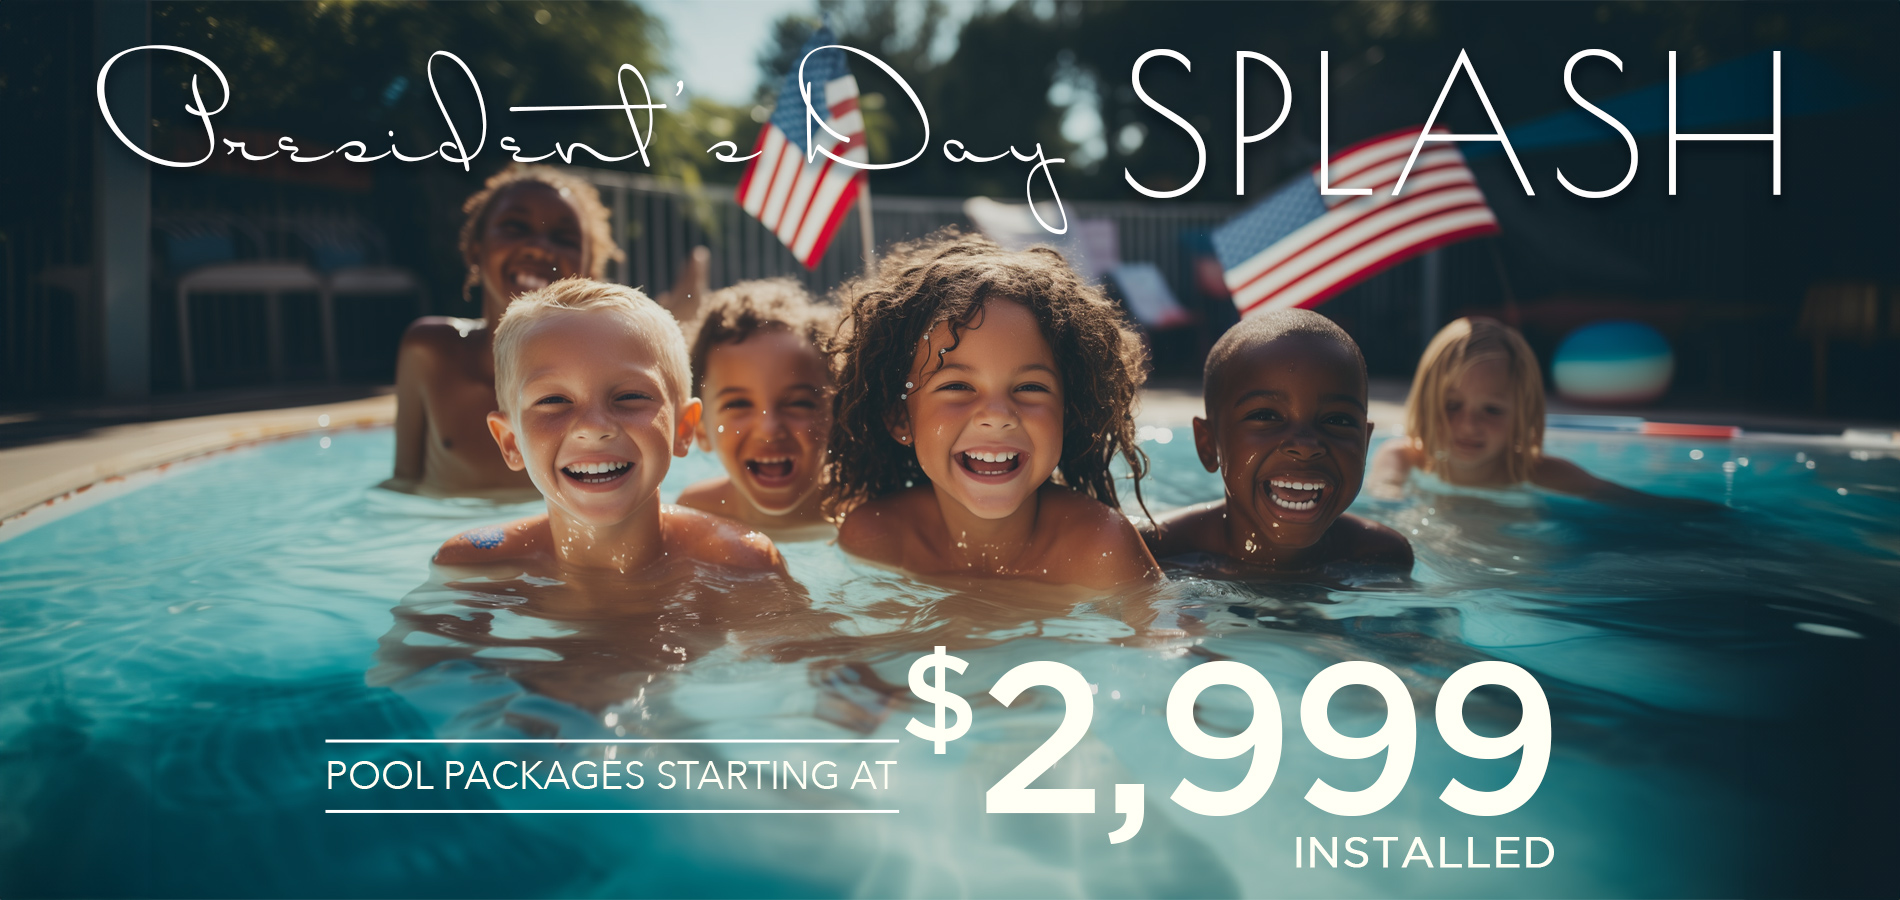 President's Day Splash: Pool Packages Starting At $2,999 Installed